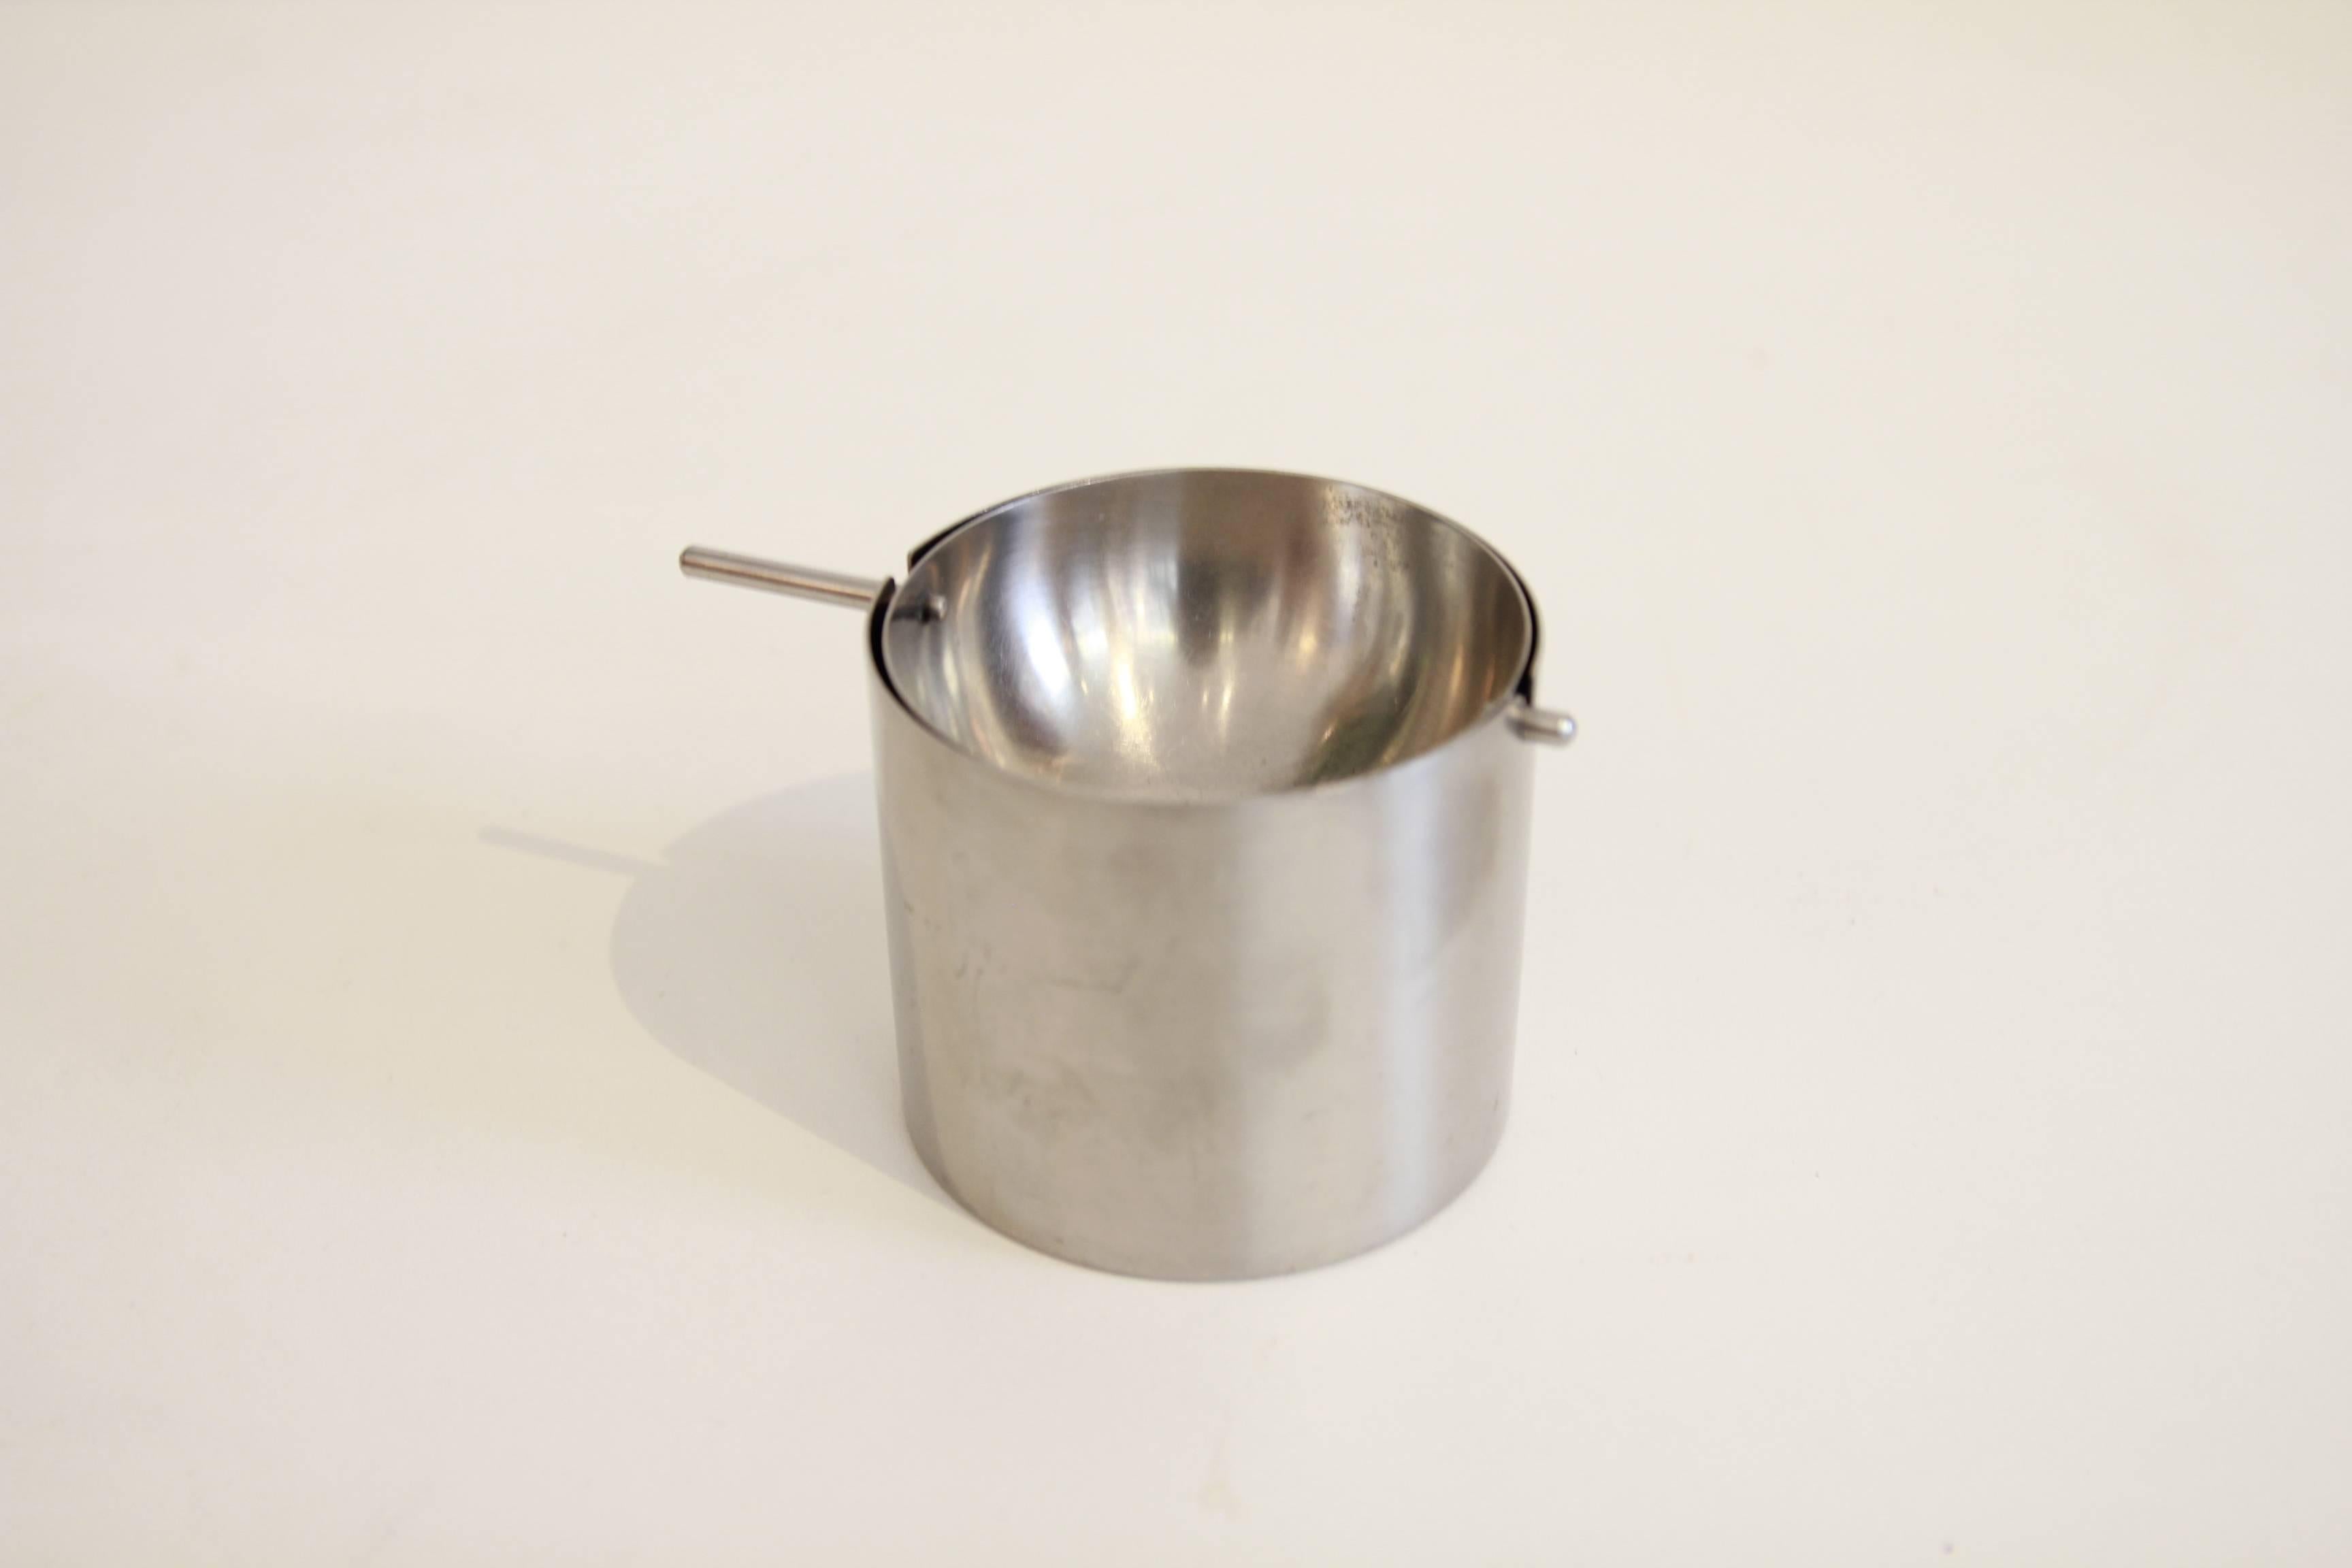 This cylinda-line revolving ashtray from Arne Jacobsen for Stelton was manufactured in 1967. 
Clean and ready to use.